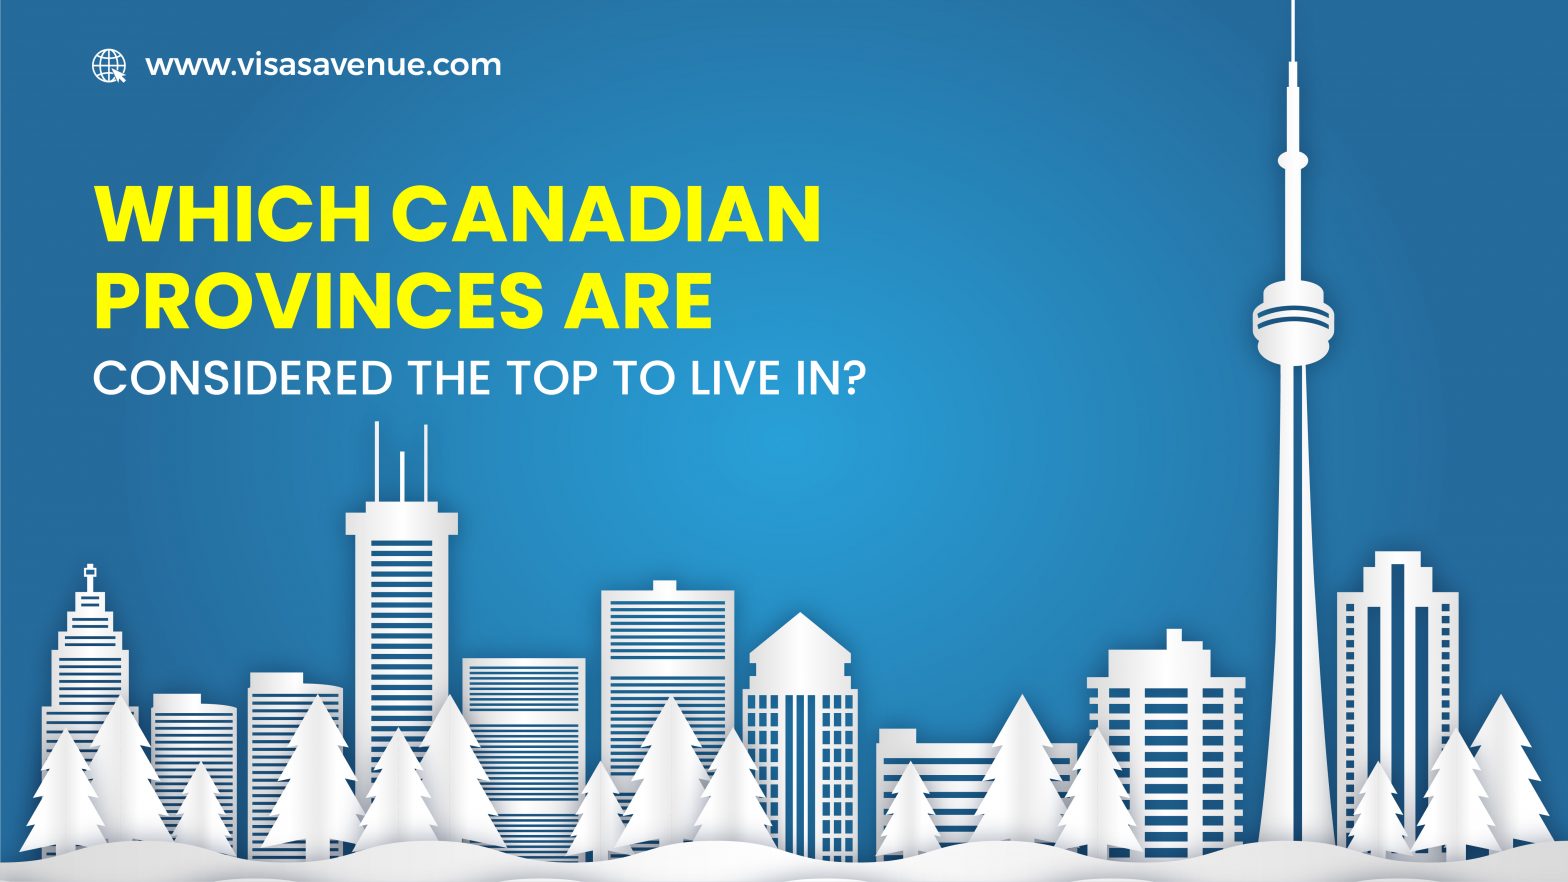 Which Canadian provinces are considered the top to live in